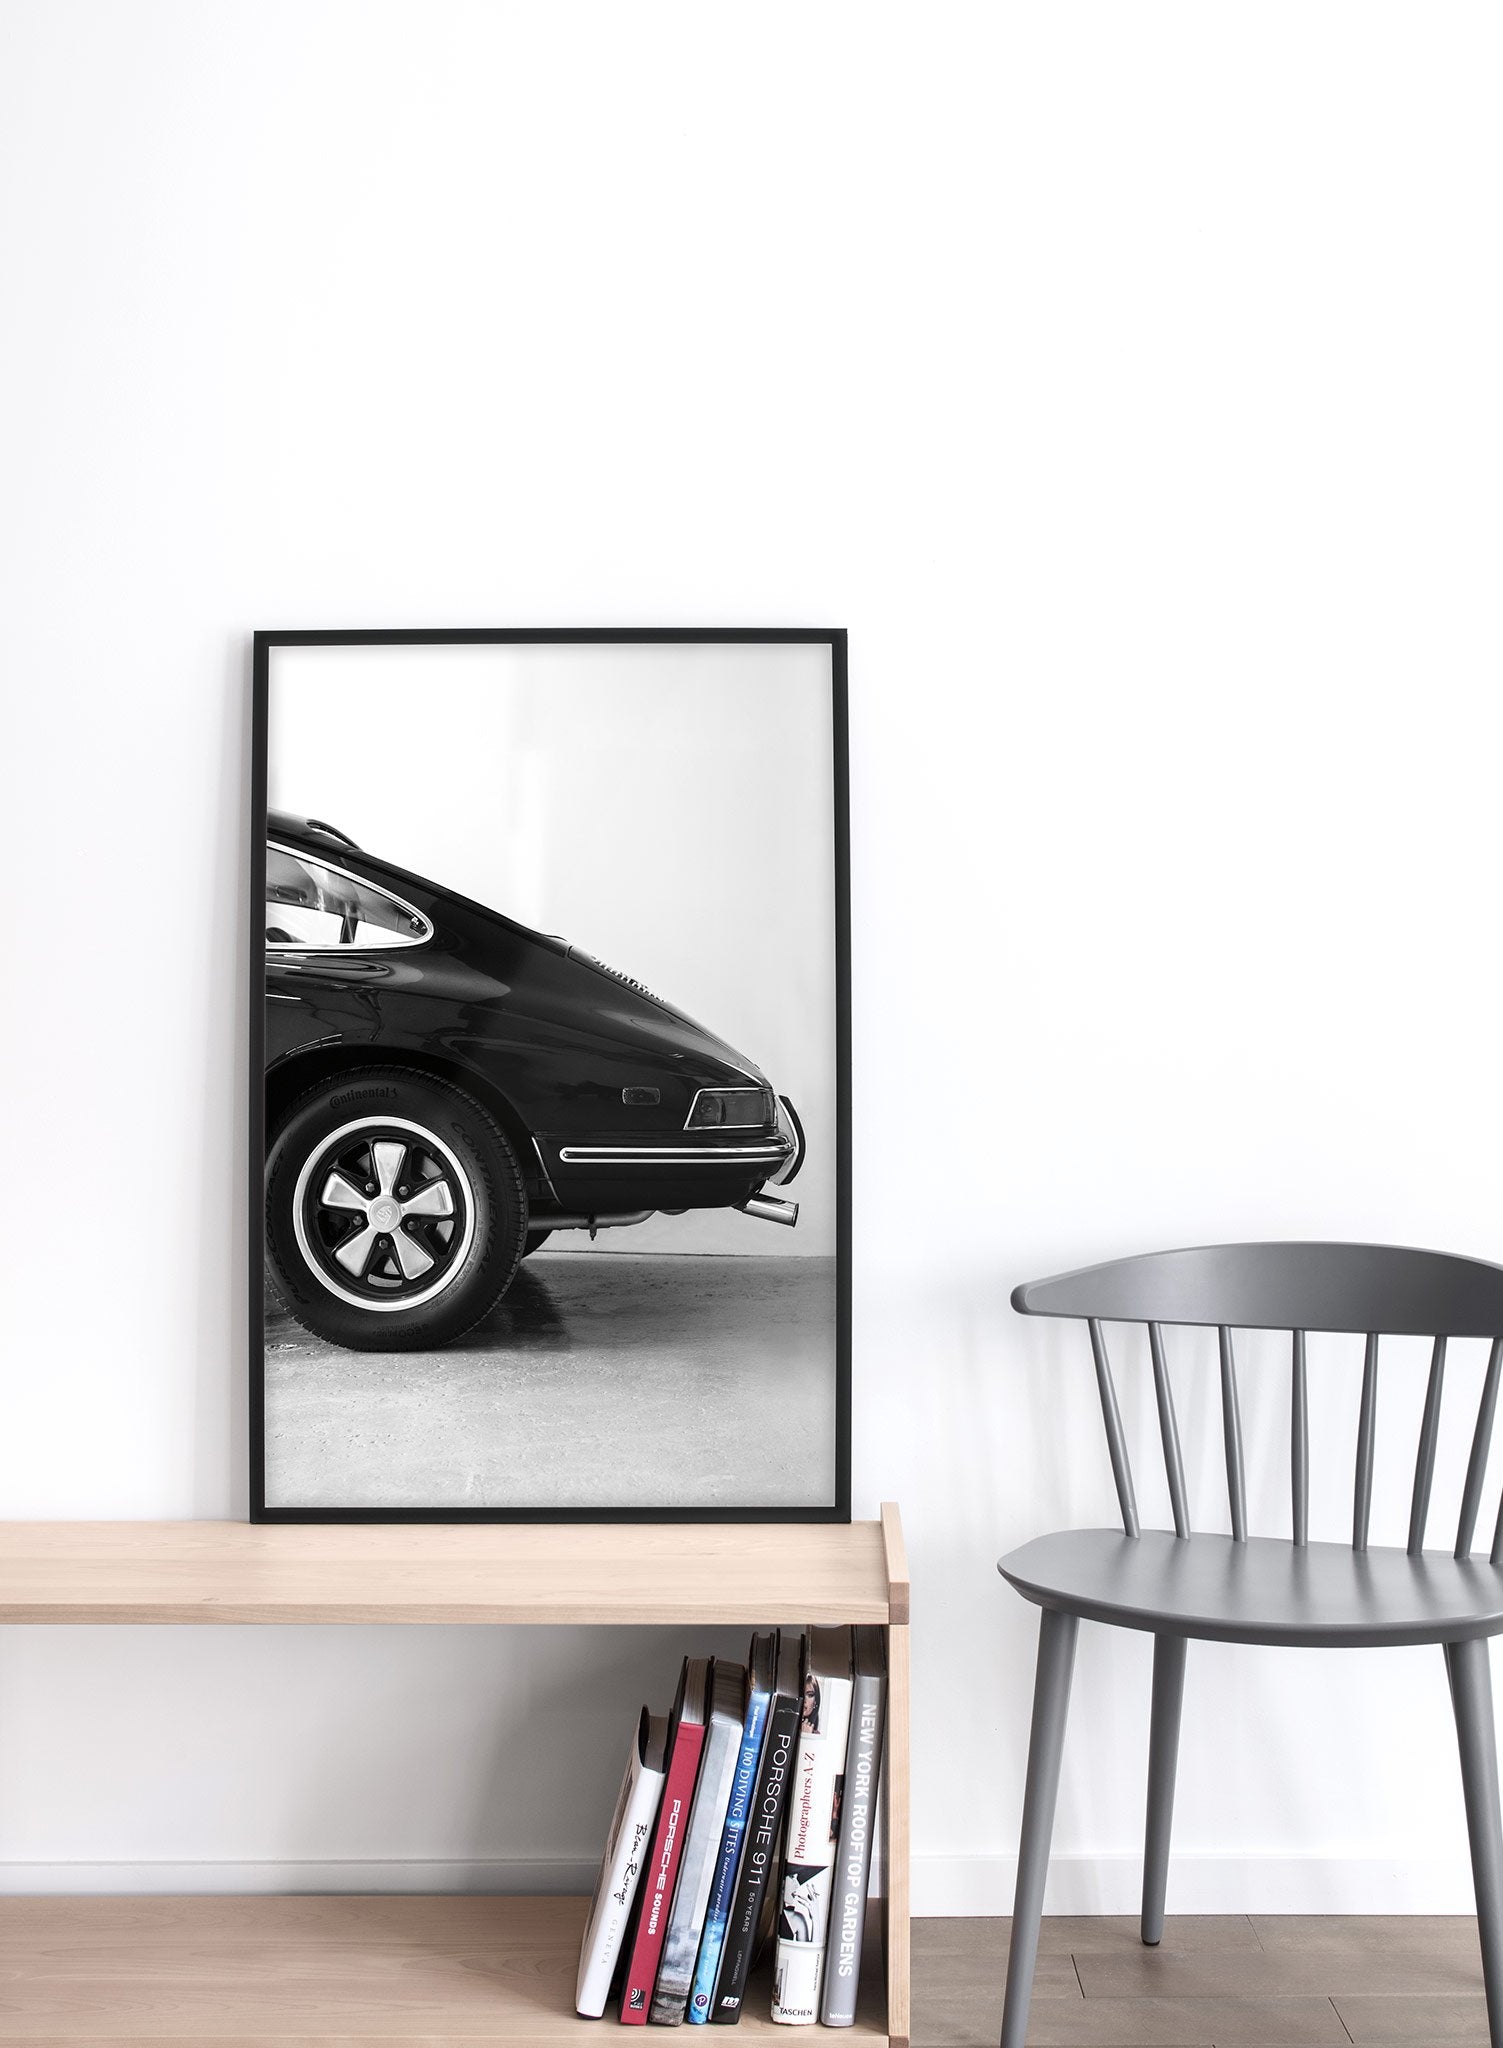 Modern minimalist poster by Opposite Wall with black and white photography of Porsche car - Lifestyle - Entryway